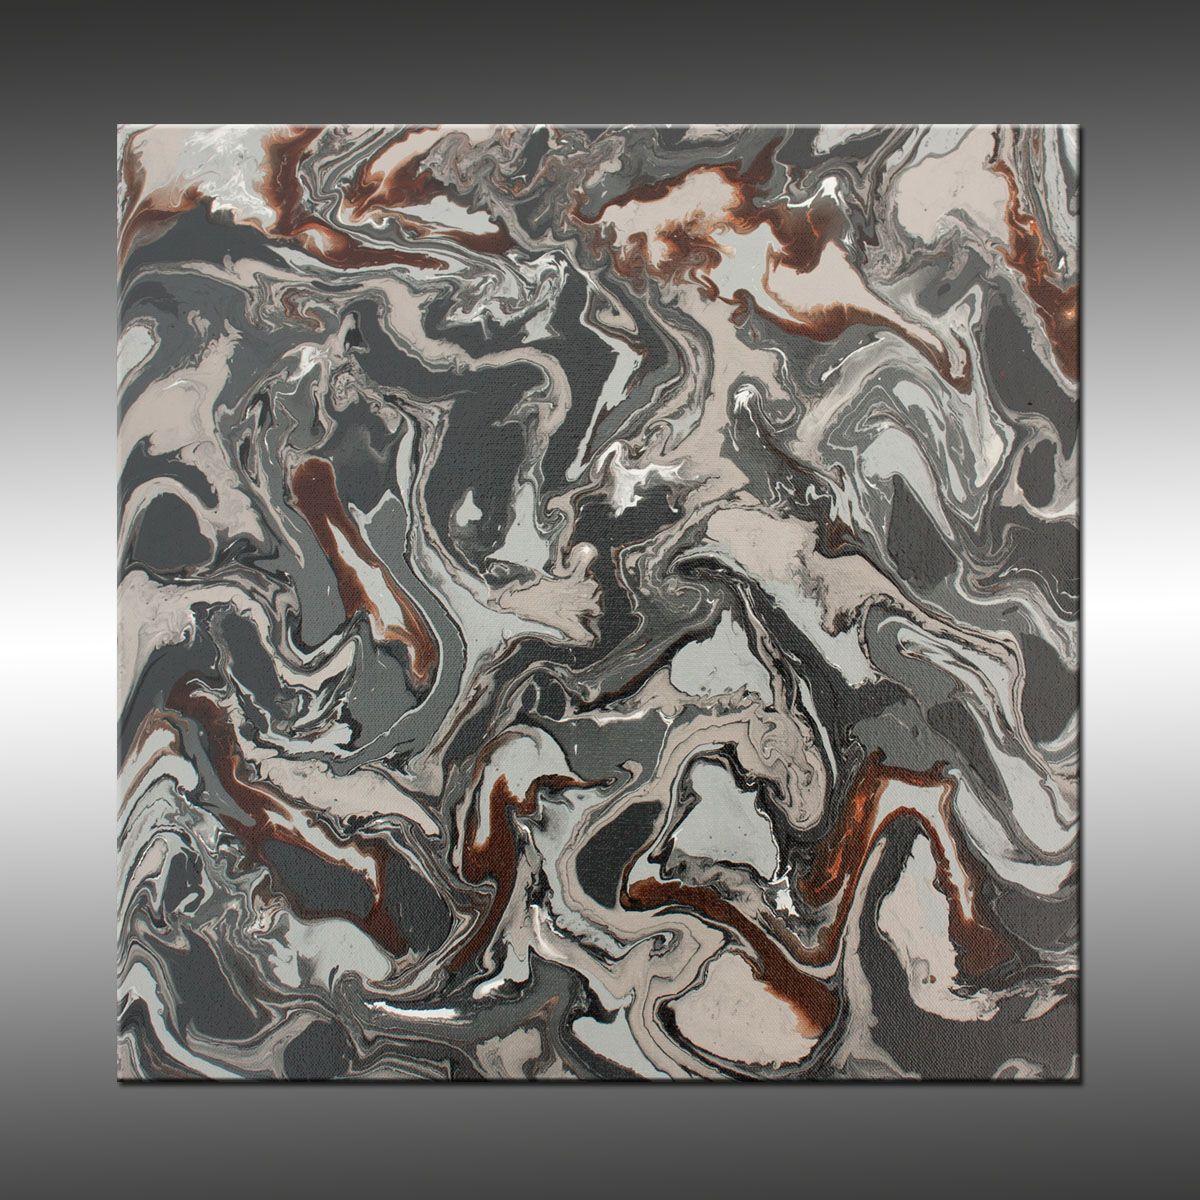 Liquid Industrial 2 is an original, modern art painting from the Liquid Industrial series. This one-of-a-kind painting was created with acrylic paint on gallery-wrapped canvas. It has a width of 16 inches and a height of 16 inches with a depth of 1